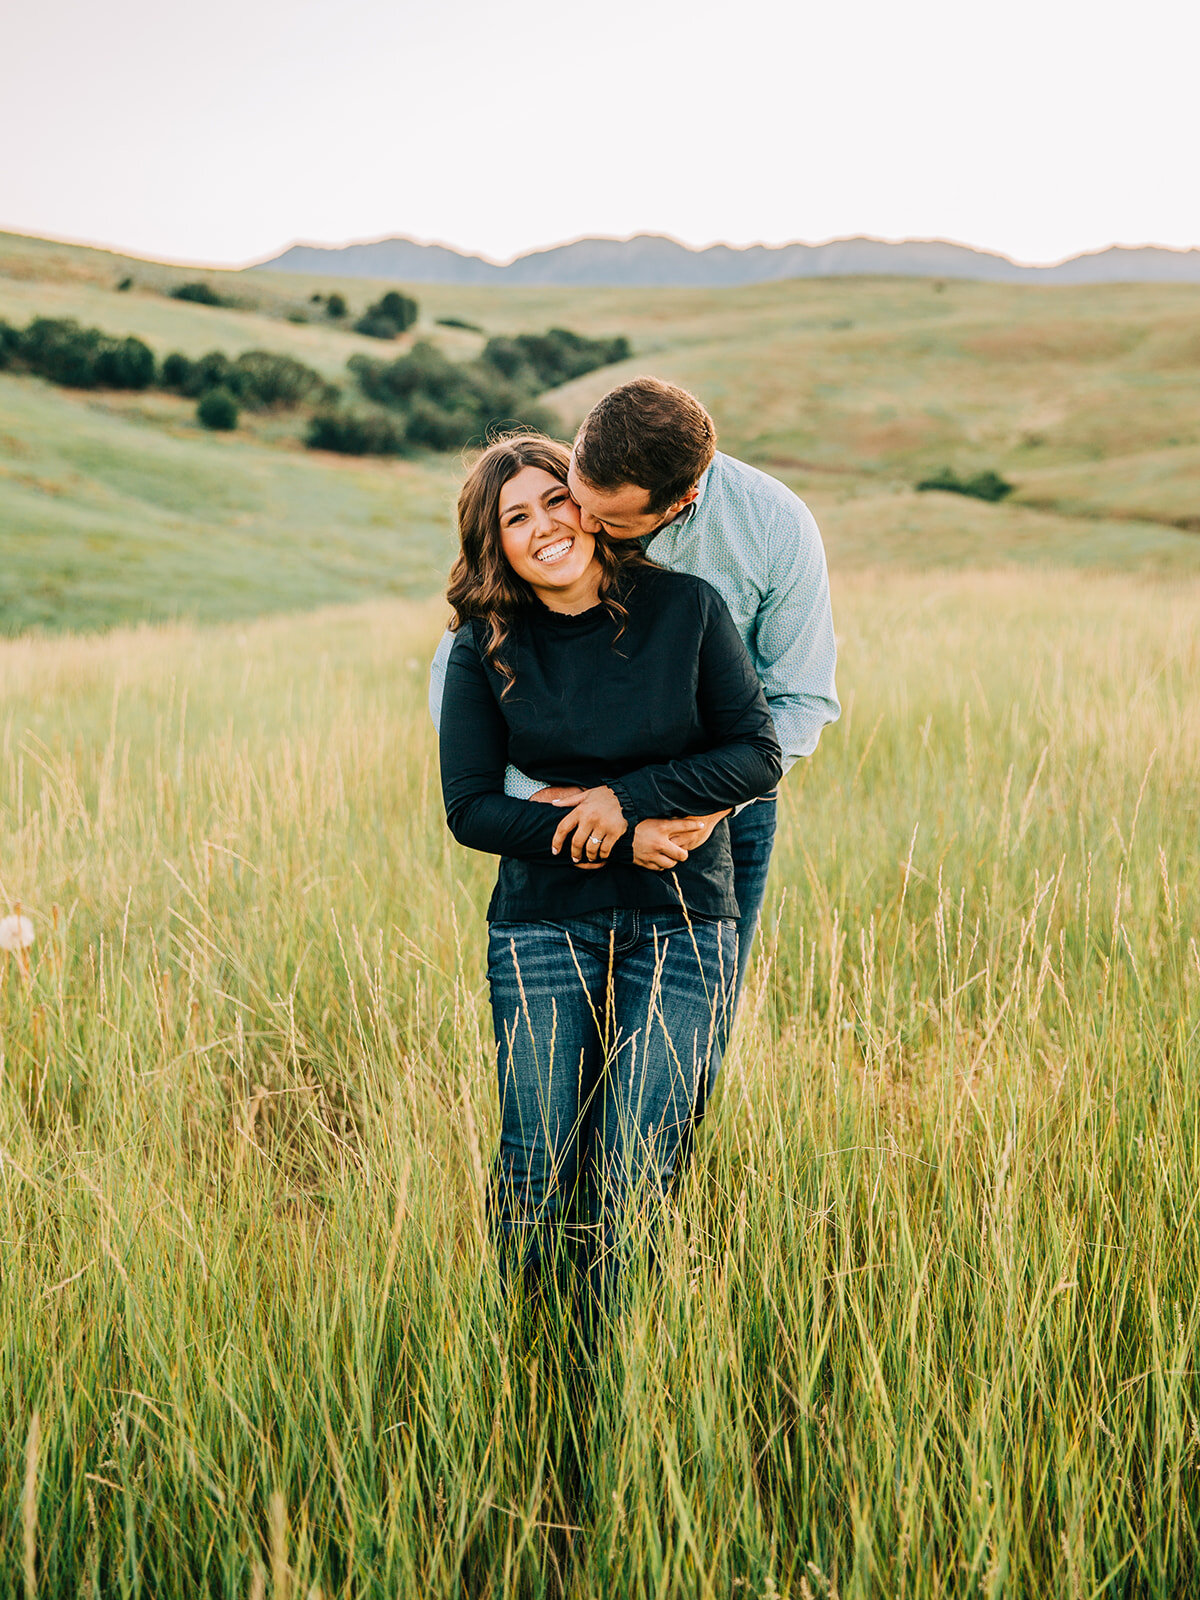  country love small town couple summer infused engagement session green hills and grass fields hugging poses romantic posing hands around waist kissing pictures big smiles men and women hairstyles engagement outfit inspo cache valley photographer par